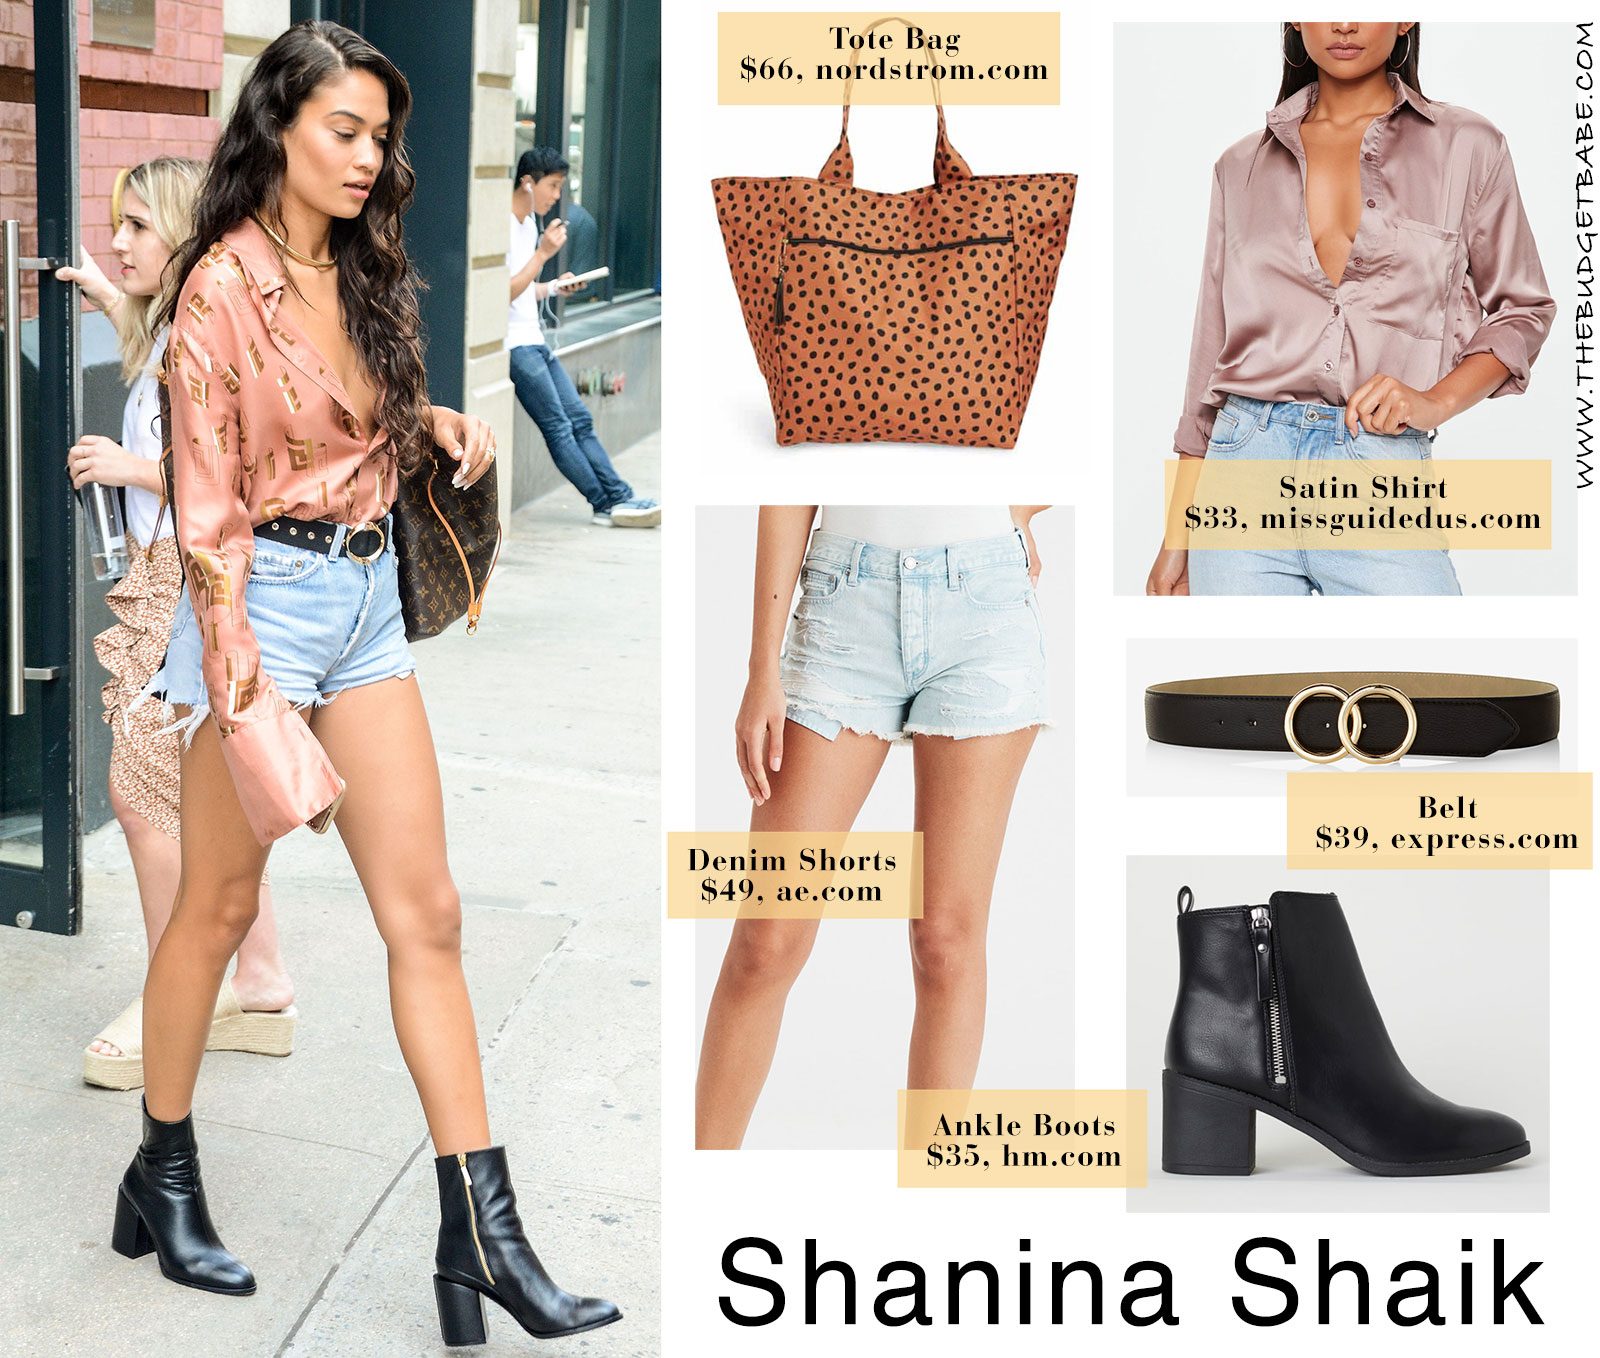 Shanina Shaik's satin blouse and ankle boots look for less